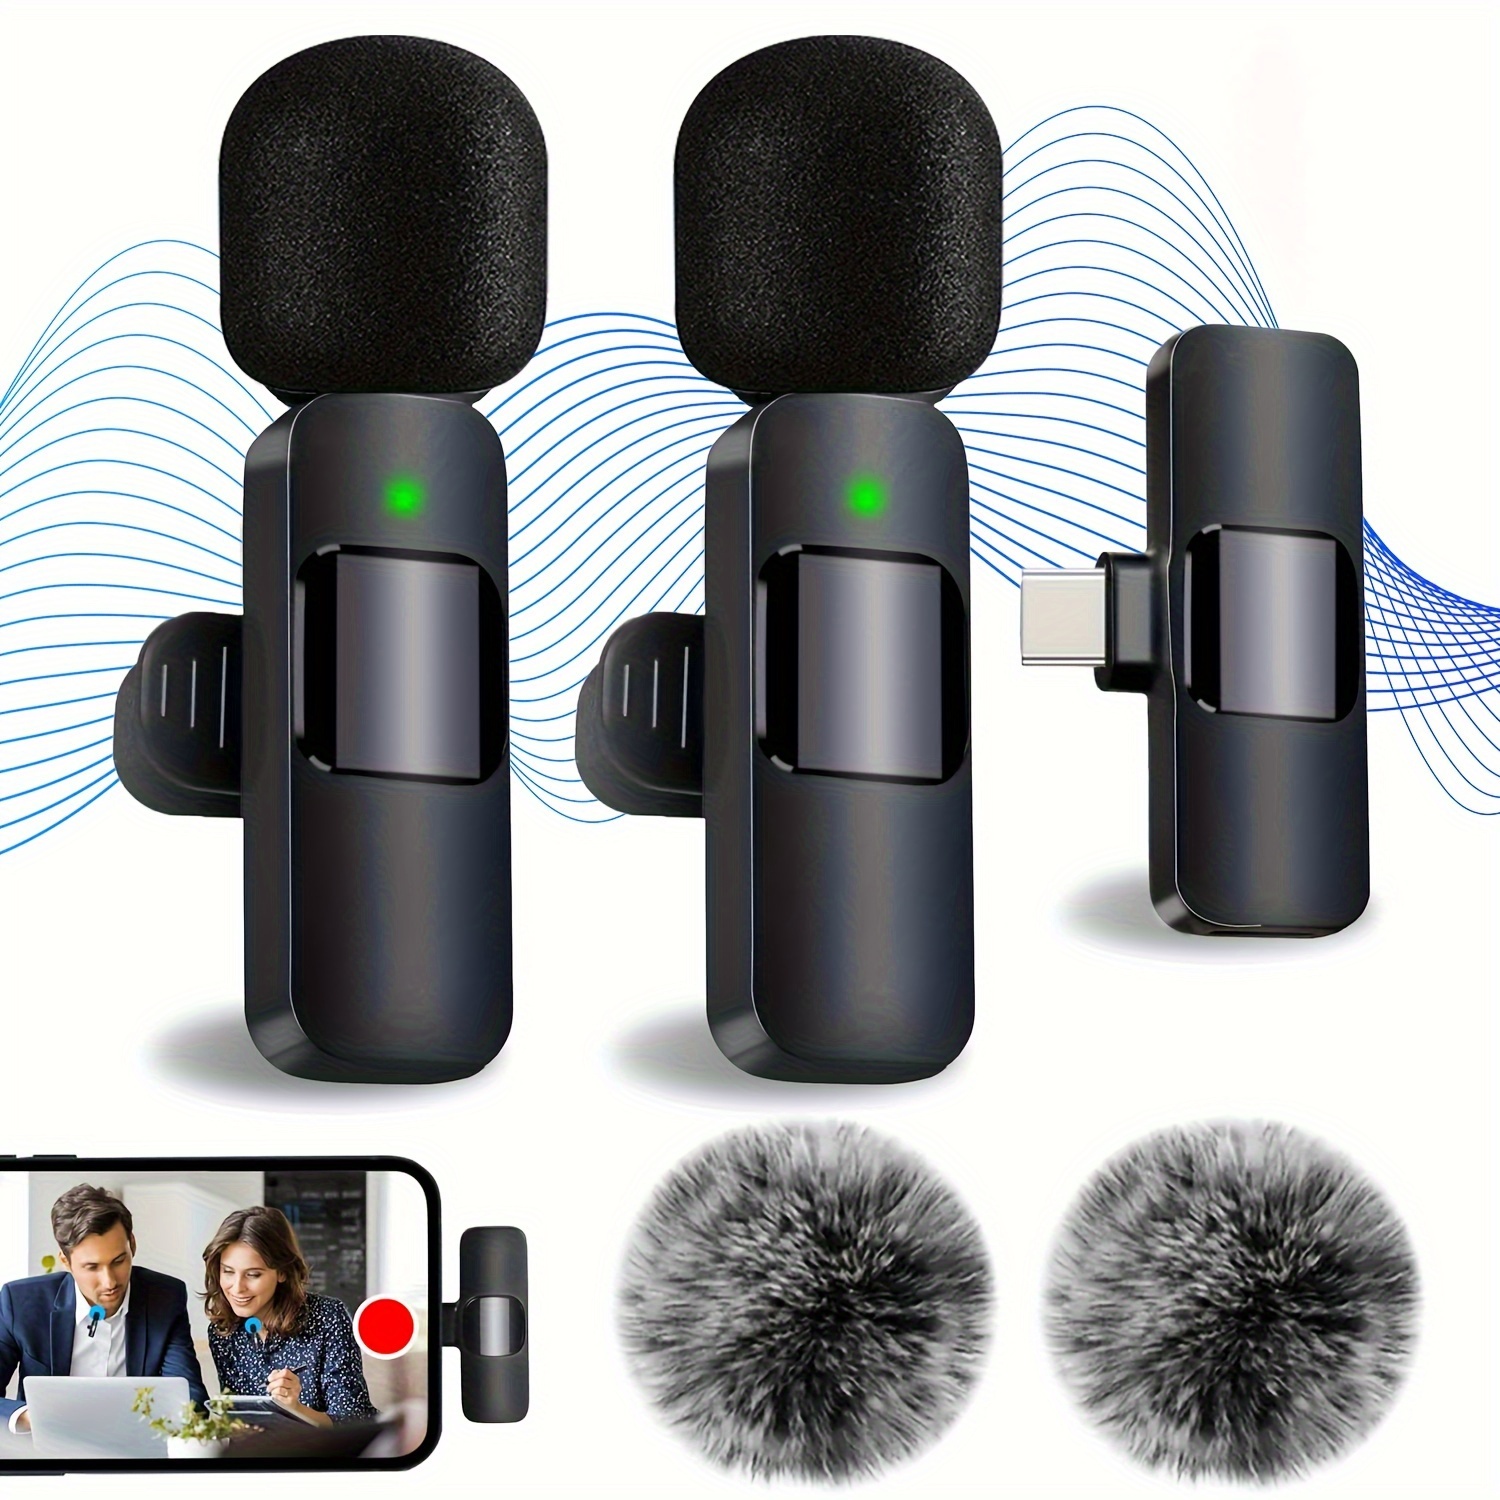 

Wireless Lavalier Microphone Lapel Dual Mics For Android - Cordless Omnidirectional Condenser Recording Mic For Interview Video Podcast Vlog